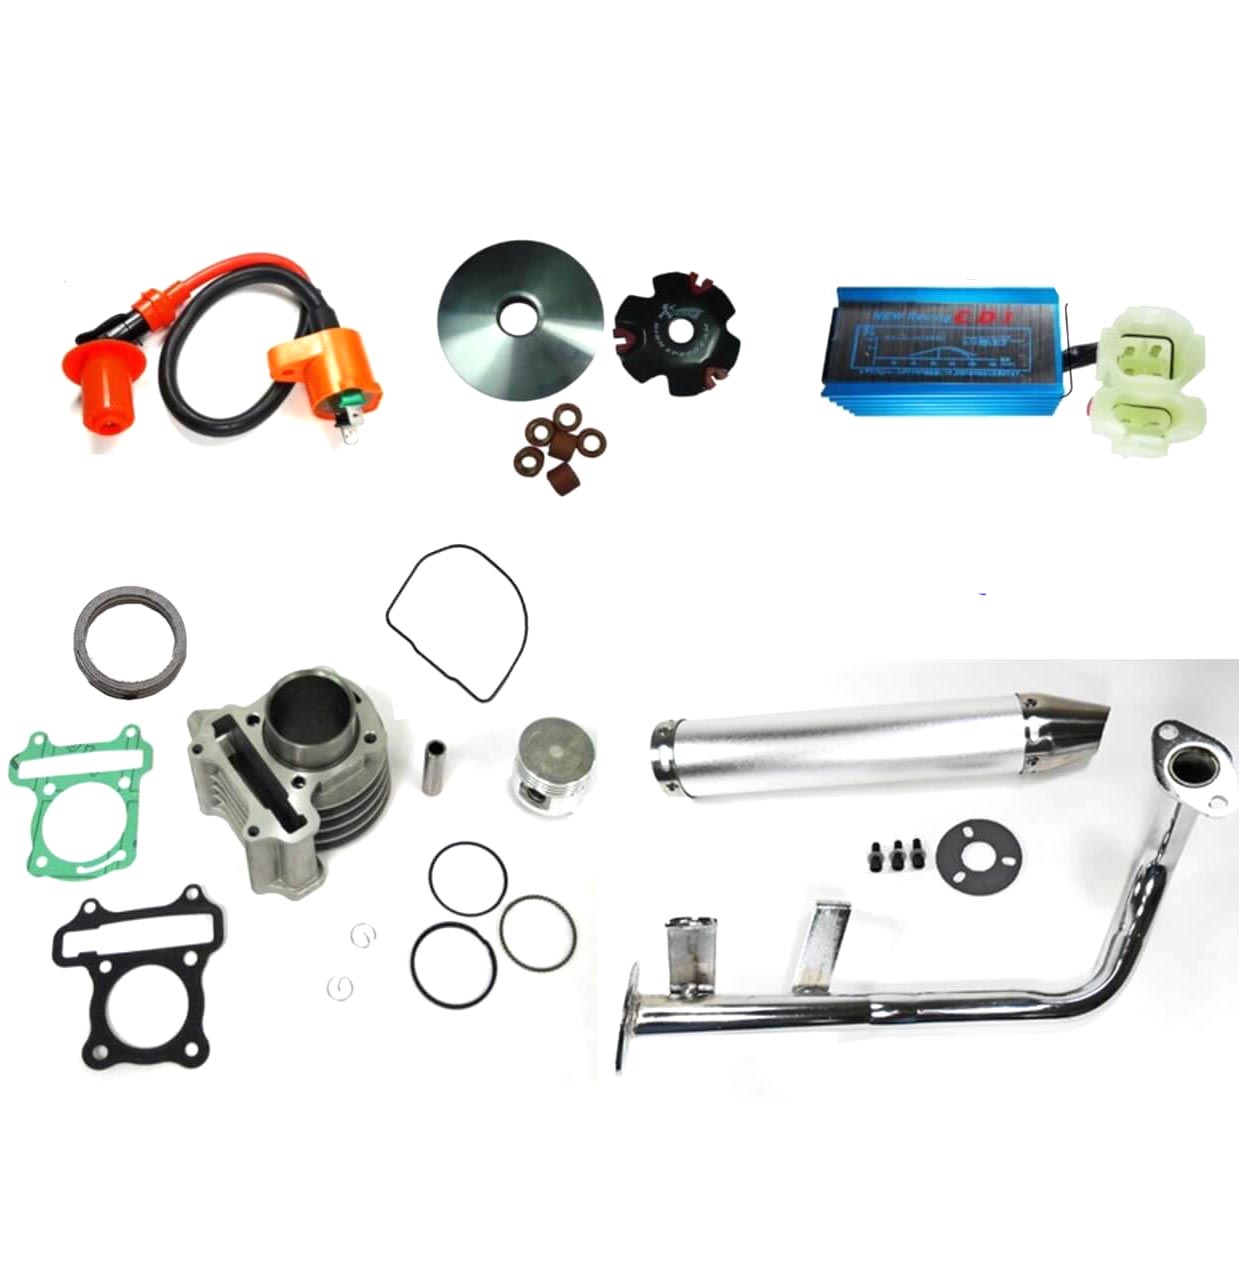 High Performance Speed Kit GY6-60cc (44mm) Comes with all parts shown.